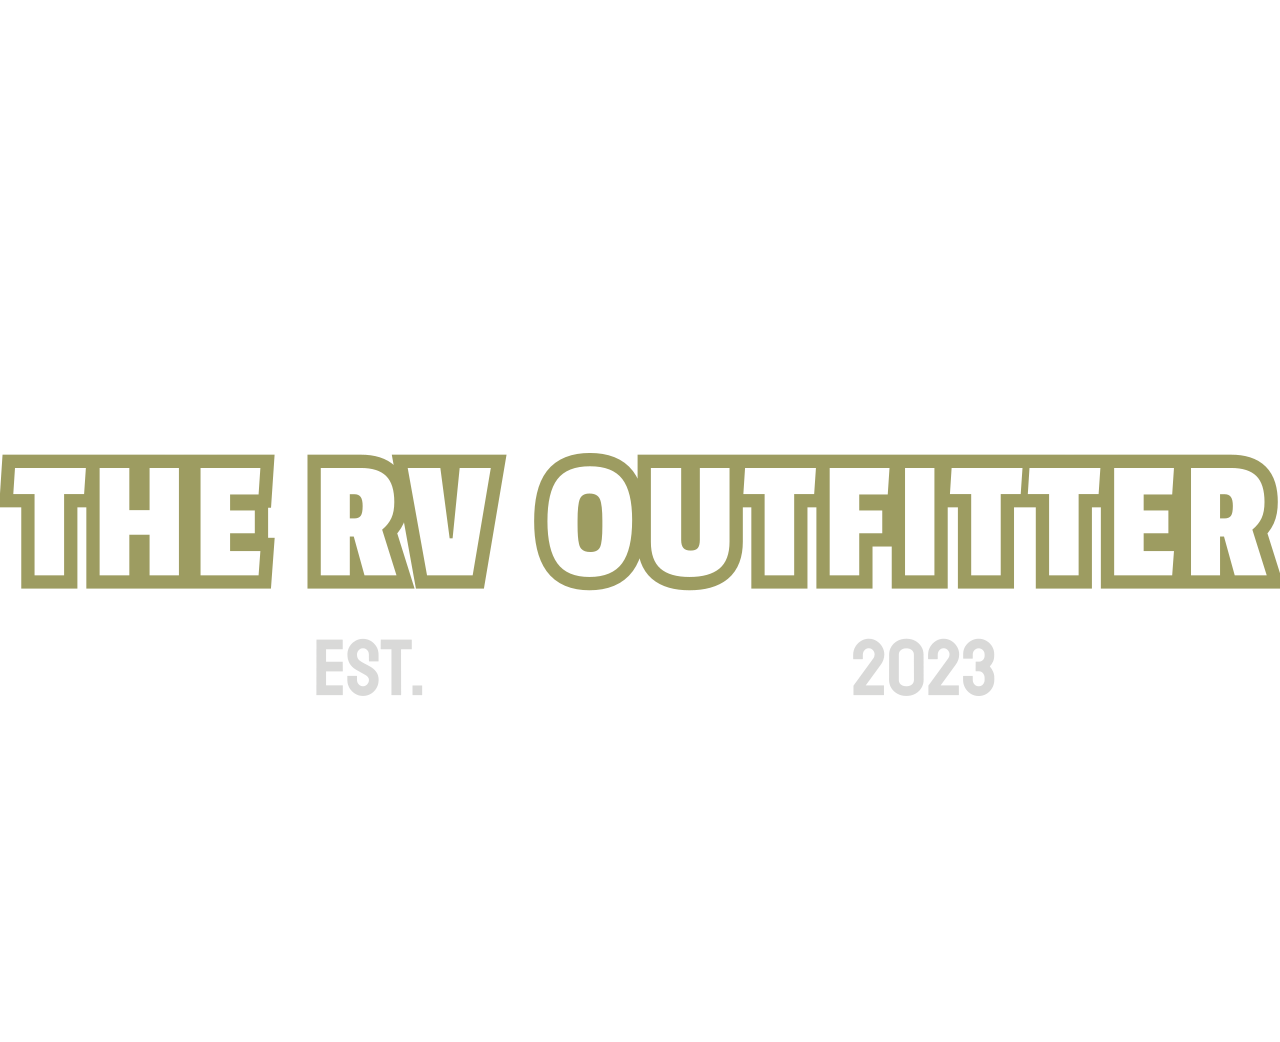 THE RV OUTFITTER's logo